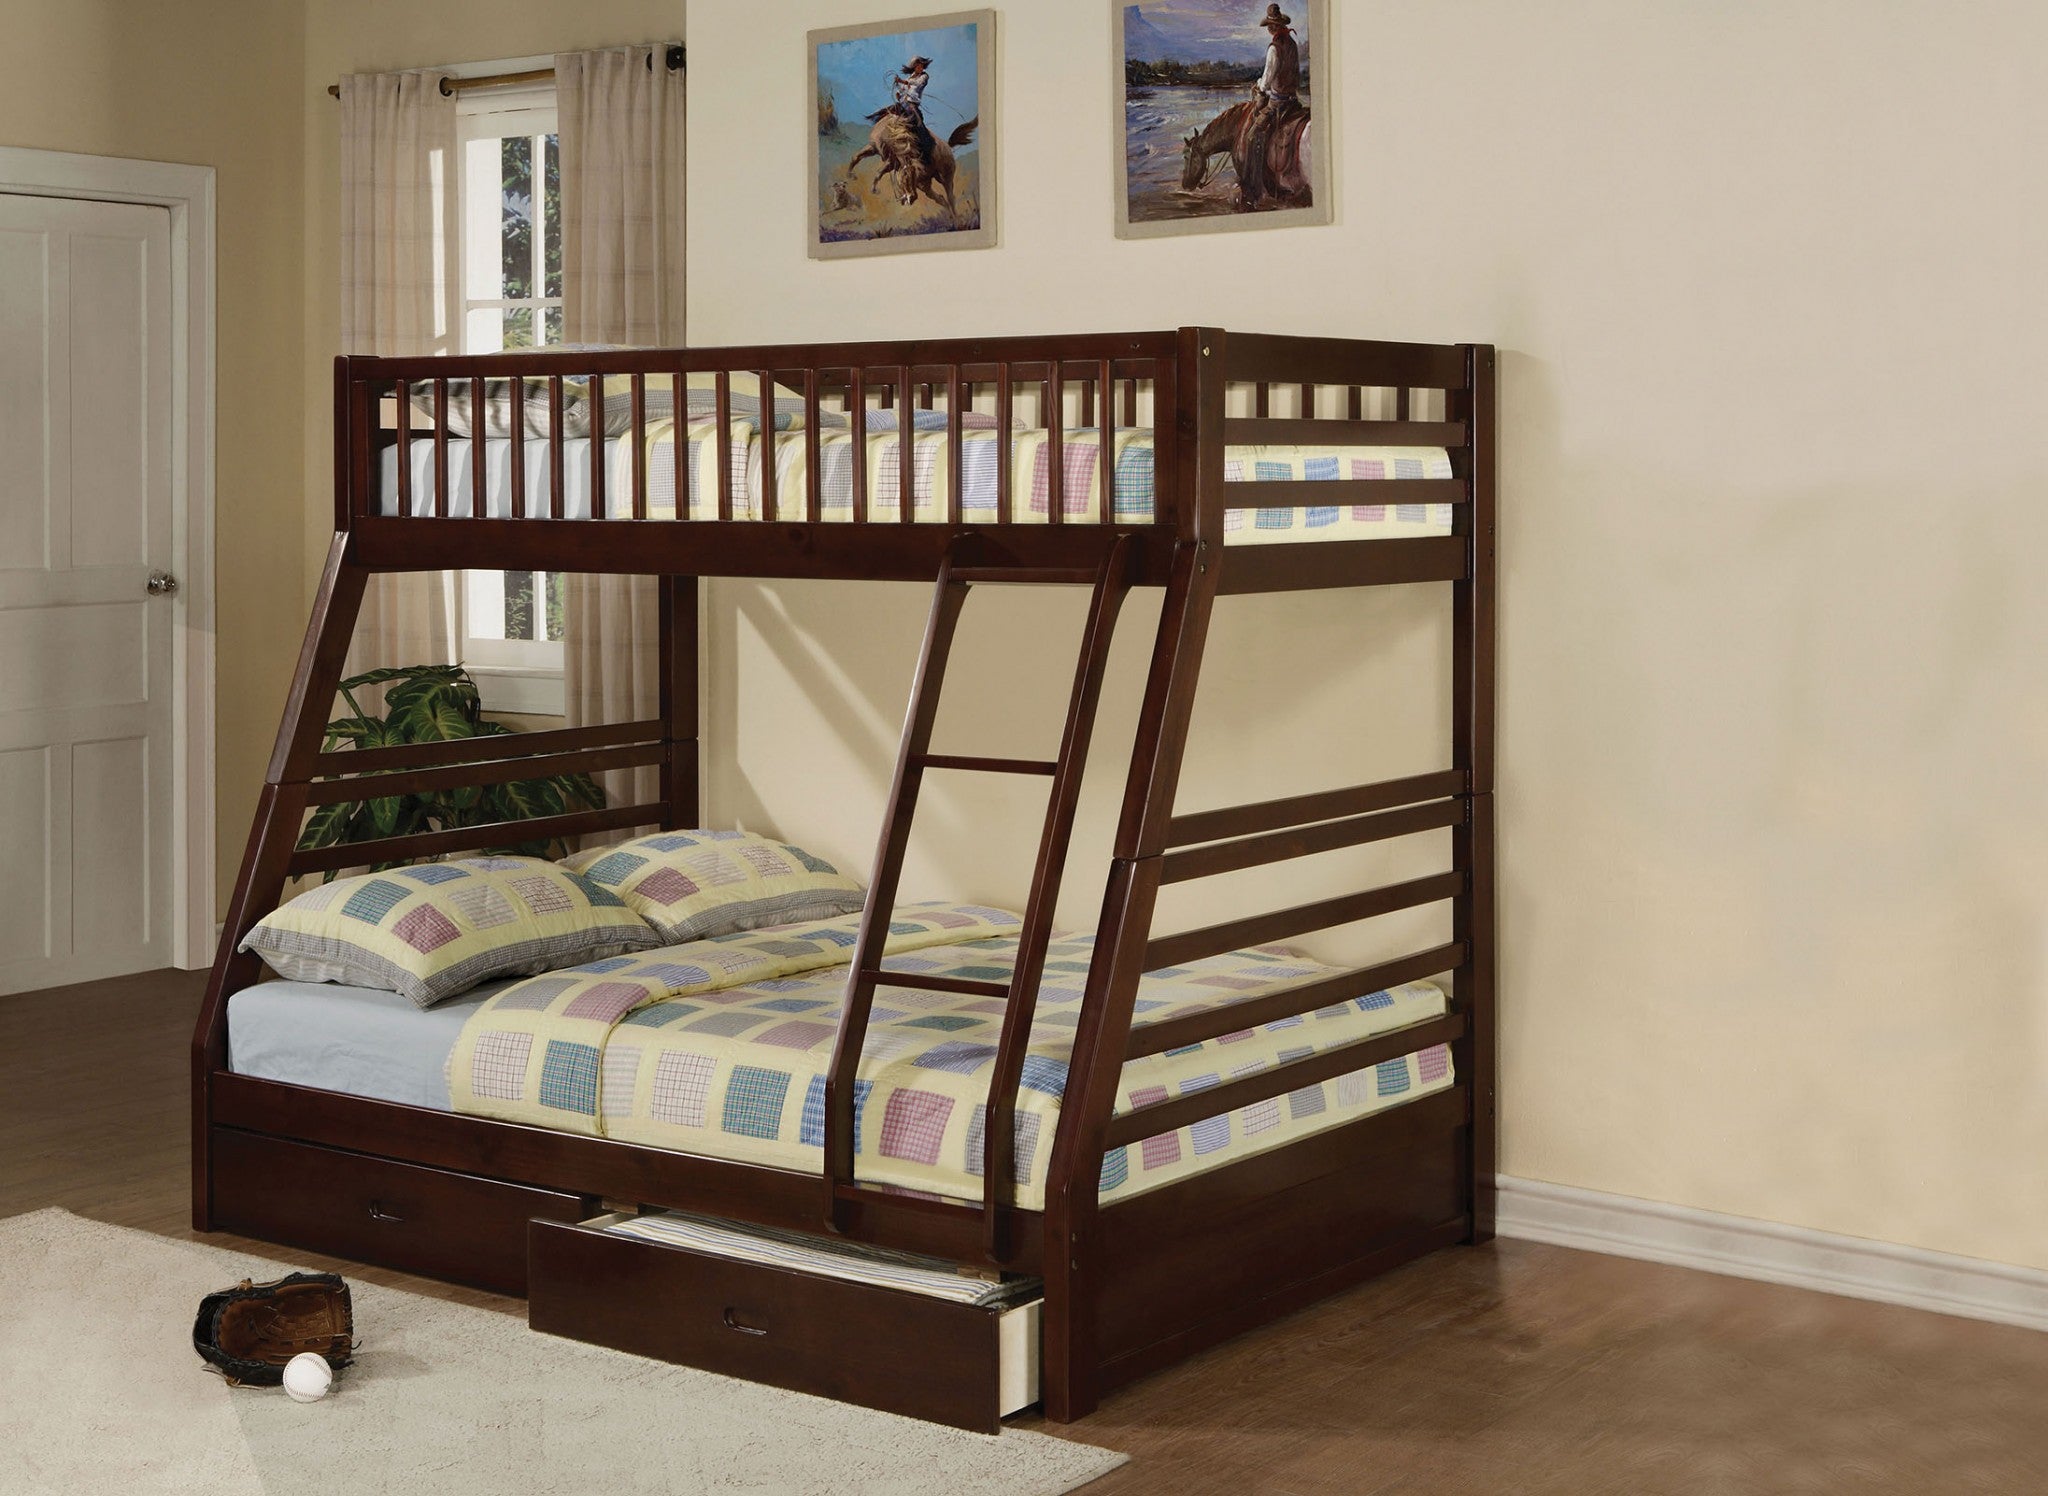 79" X 56" X 65" Epresso Pine Wood Twin Over Full Bunk Bed